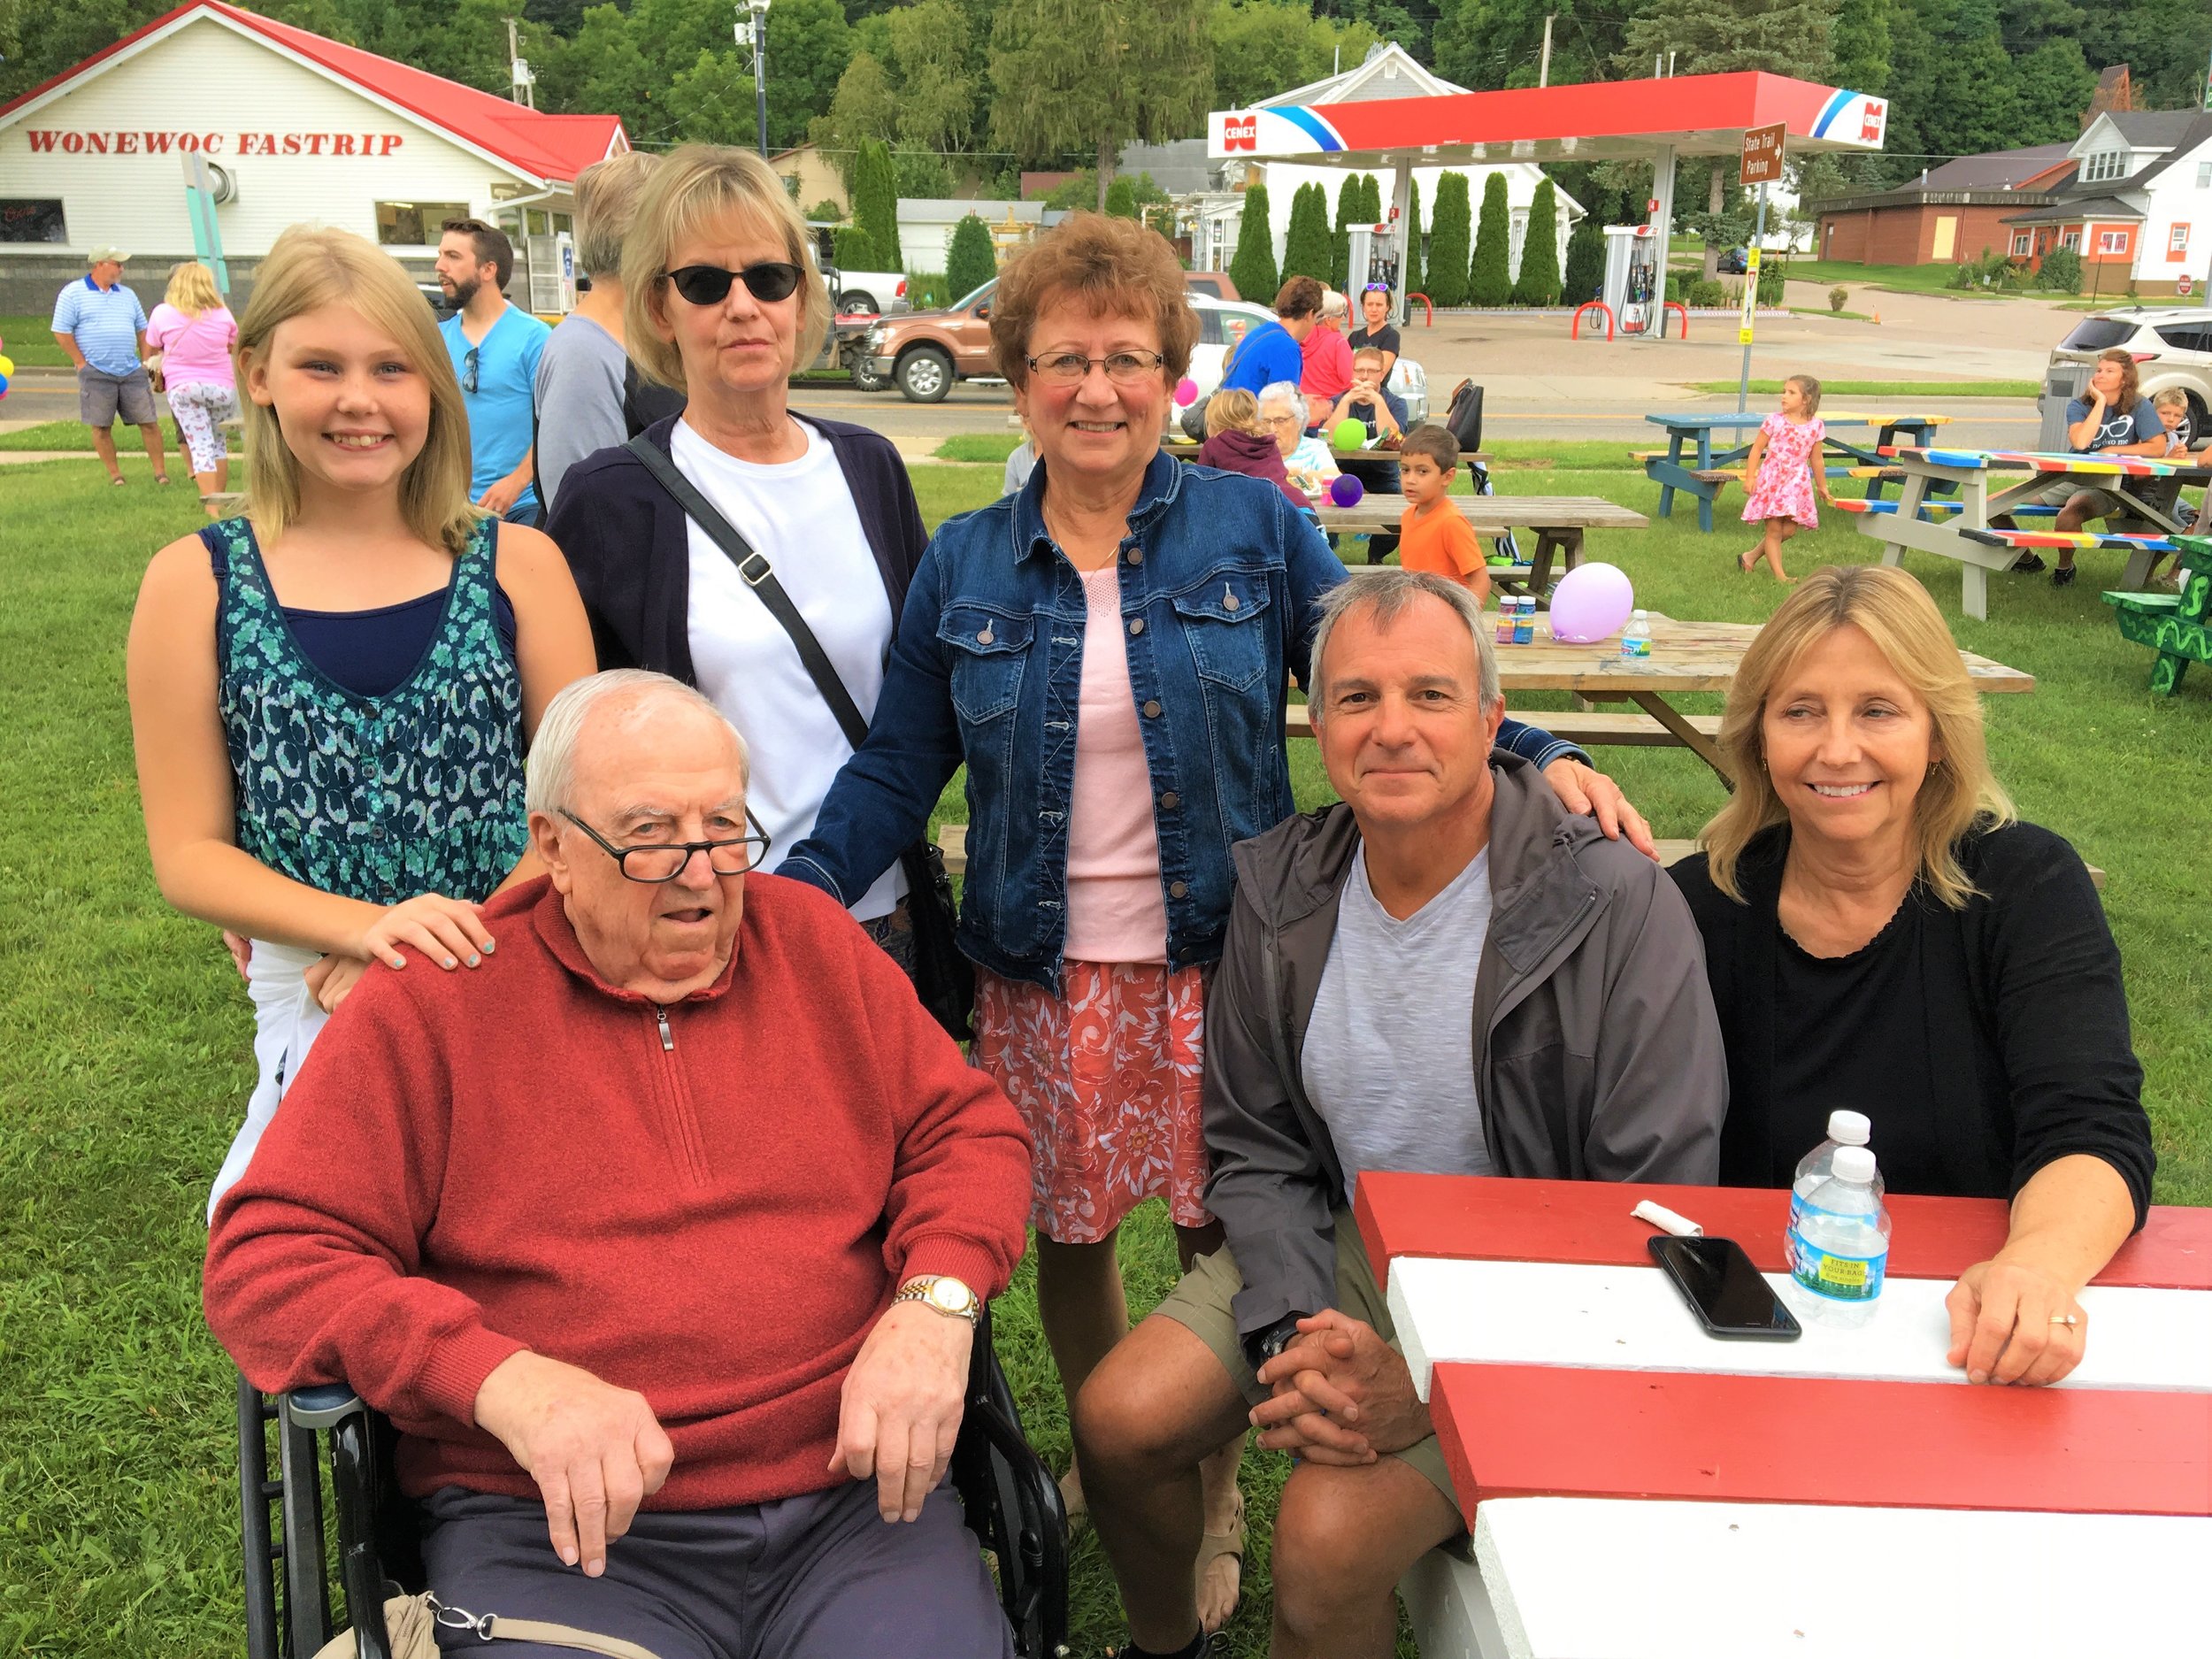  Sponsor and cheerleader Bill Huebel (seated), his granddaughter Charlotte Maloney, daughter Julie Hebel, daughter Laurie Wurster Dave Silverberg, son-in-law, daughter Betsy Huebel 